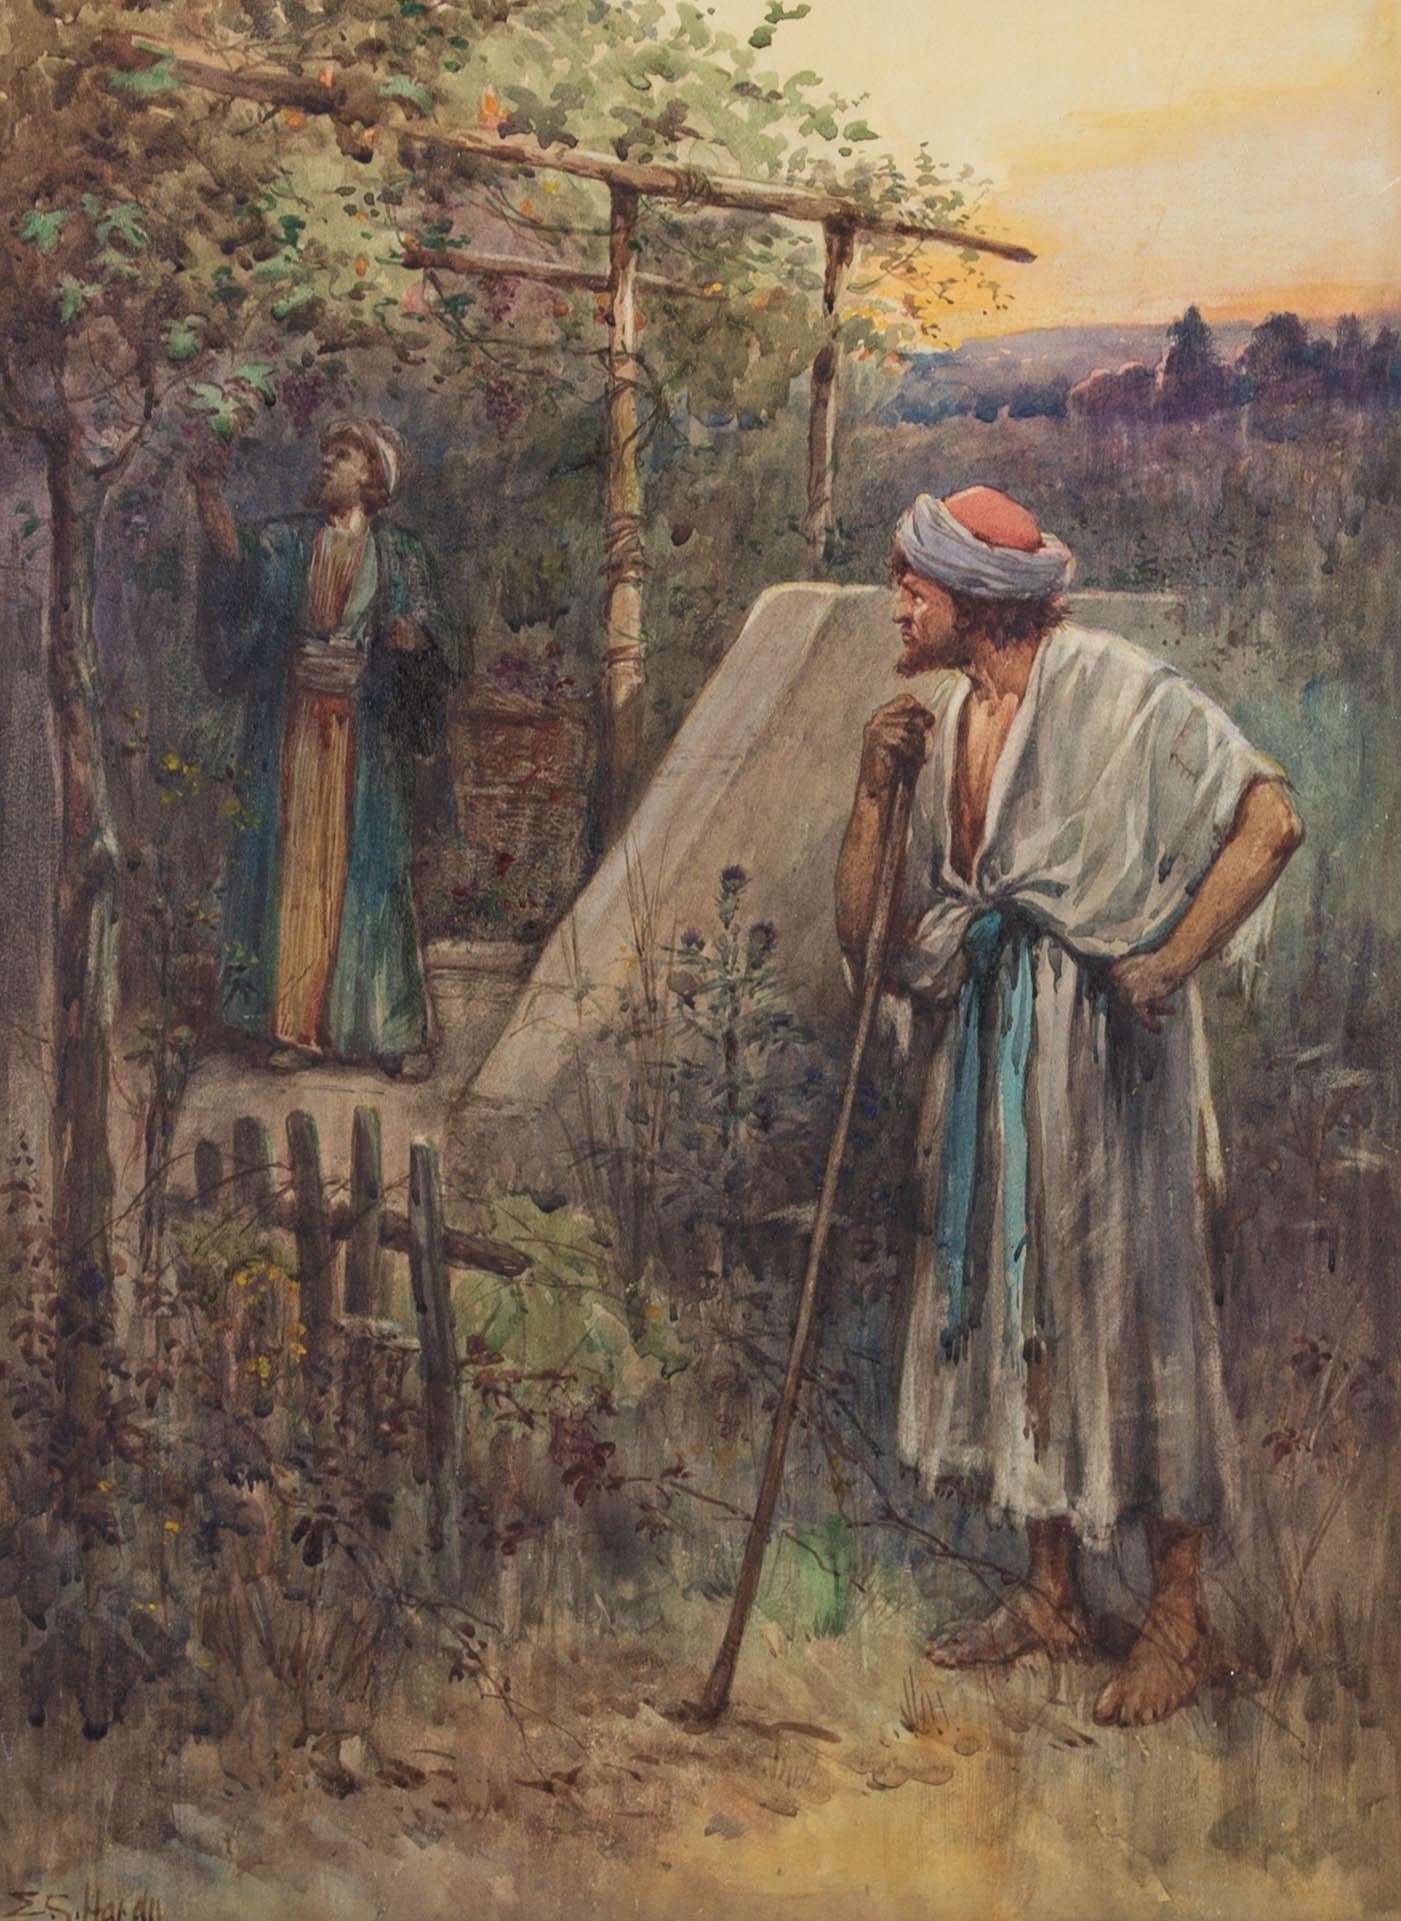 A beautiful early 20th Century watercolor showing a Biblical scene, published in a book of Bible verse for children; the exact story is unclear. Hardy was known for her delicate and highly detailed watercolors that illustrated many children's books